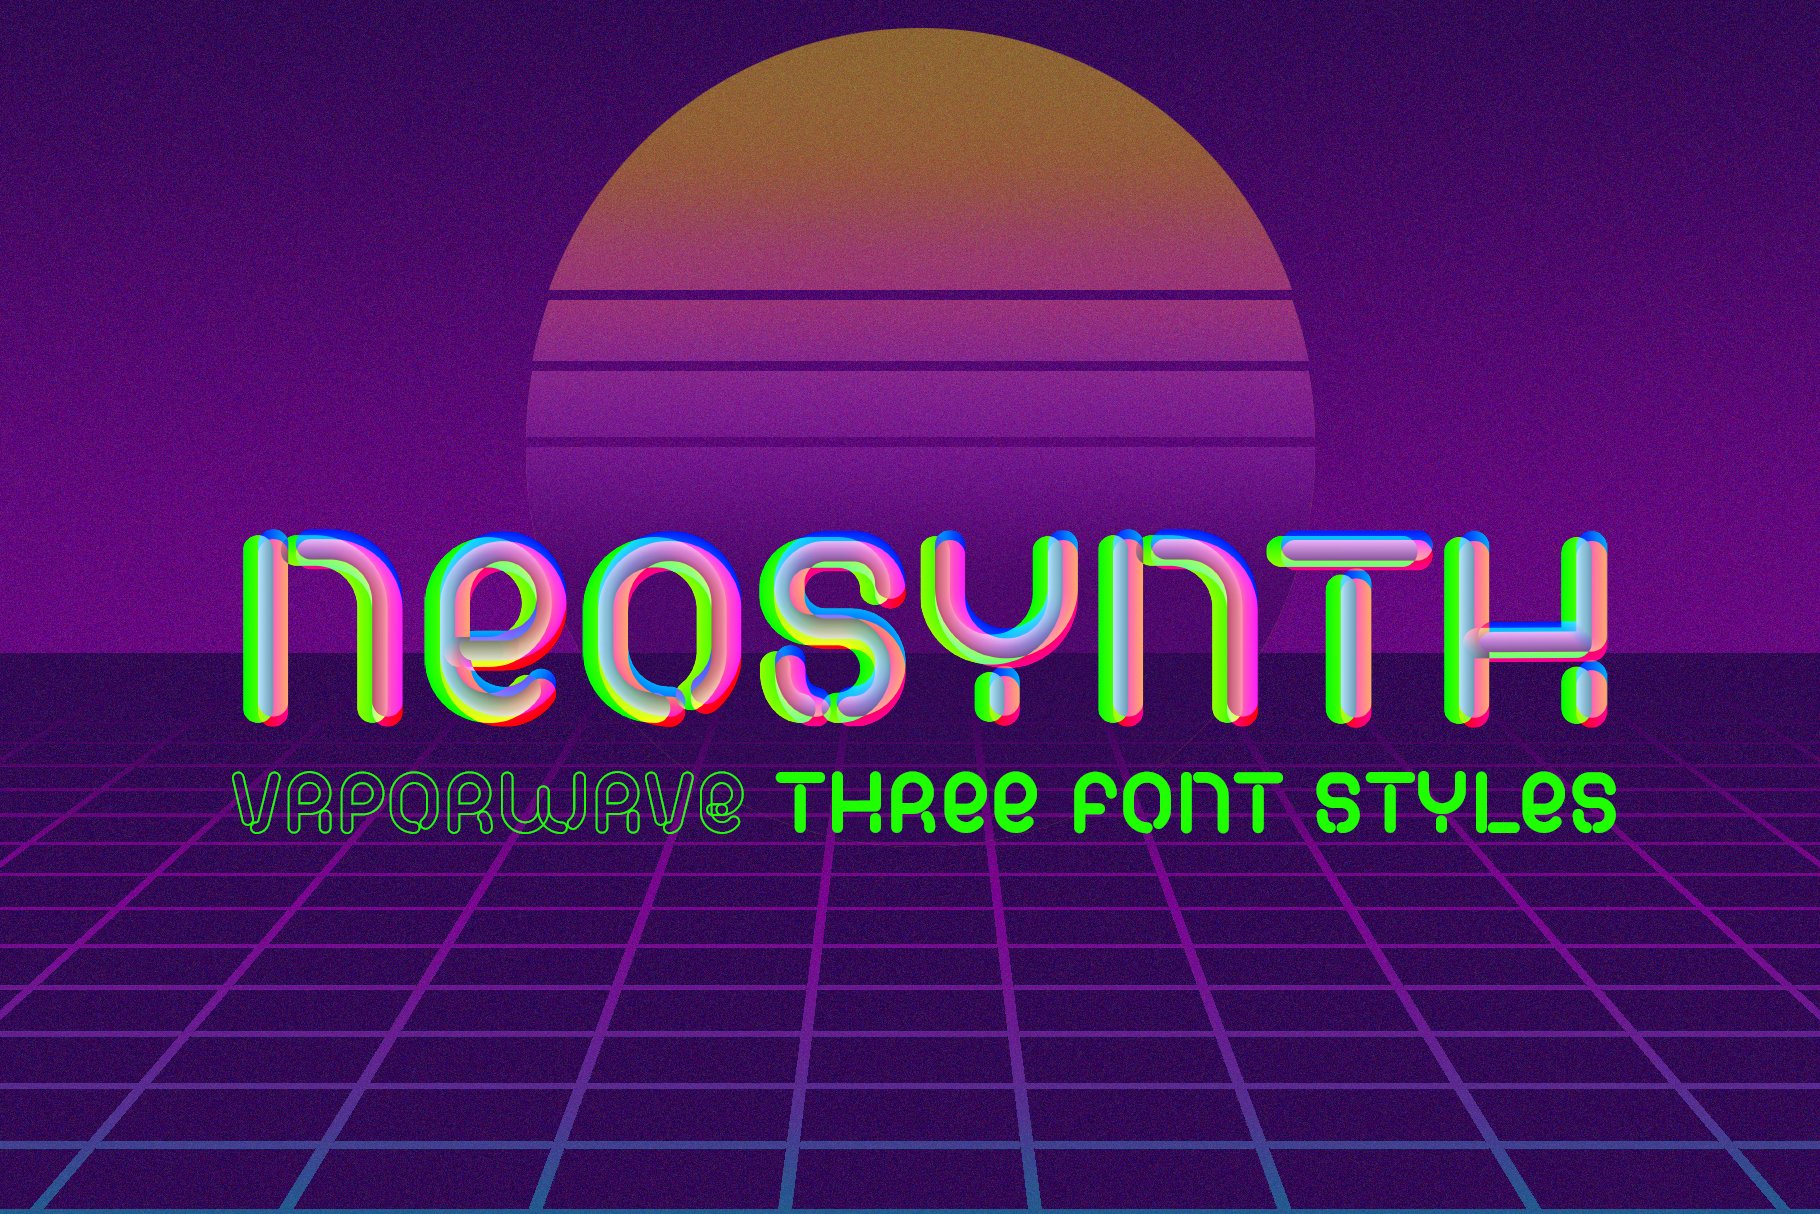 NeoSynth | Vaporwave Font Styles cover image.